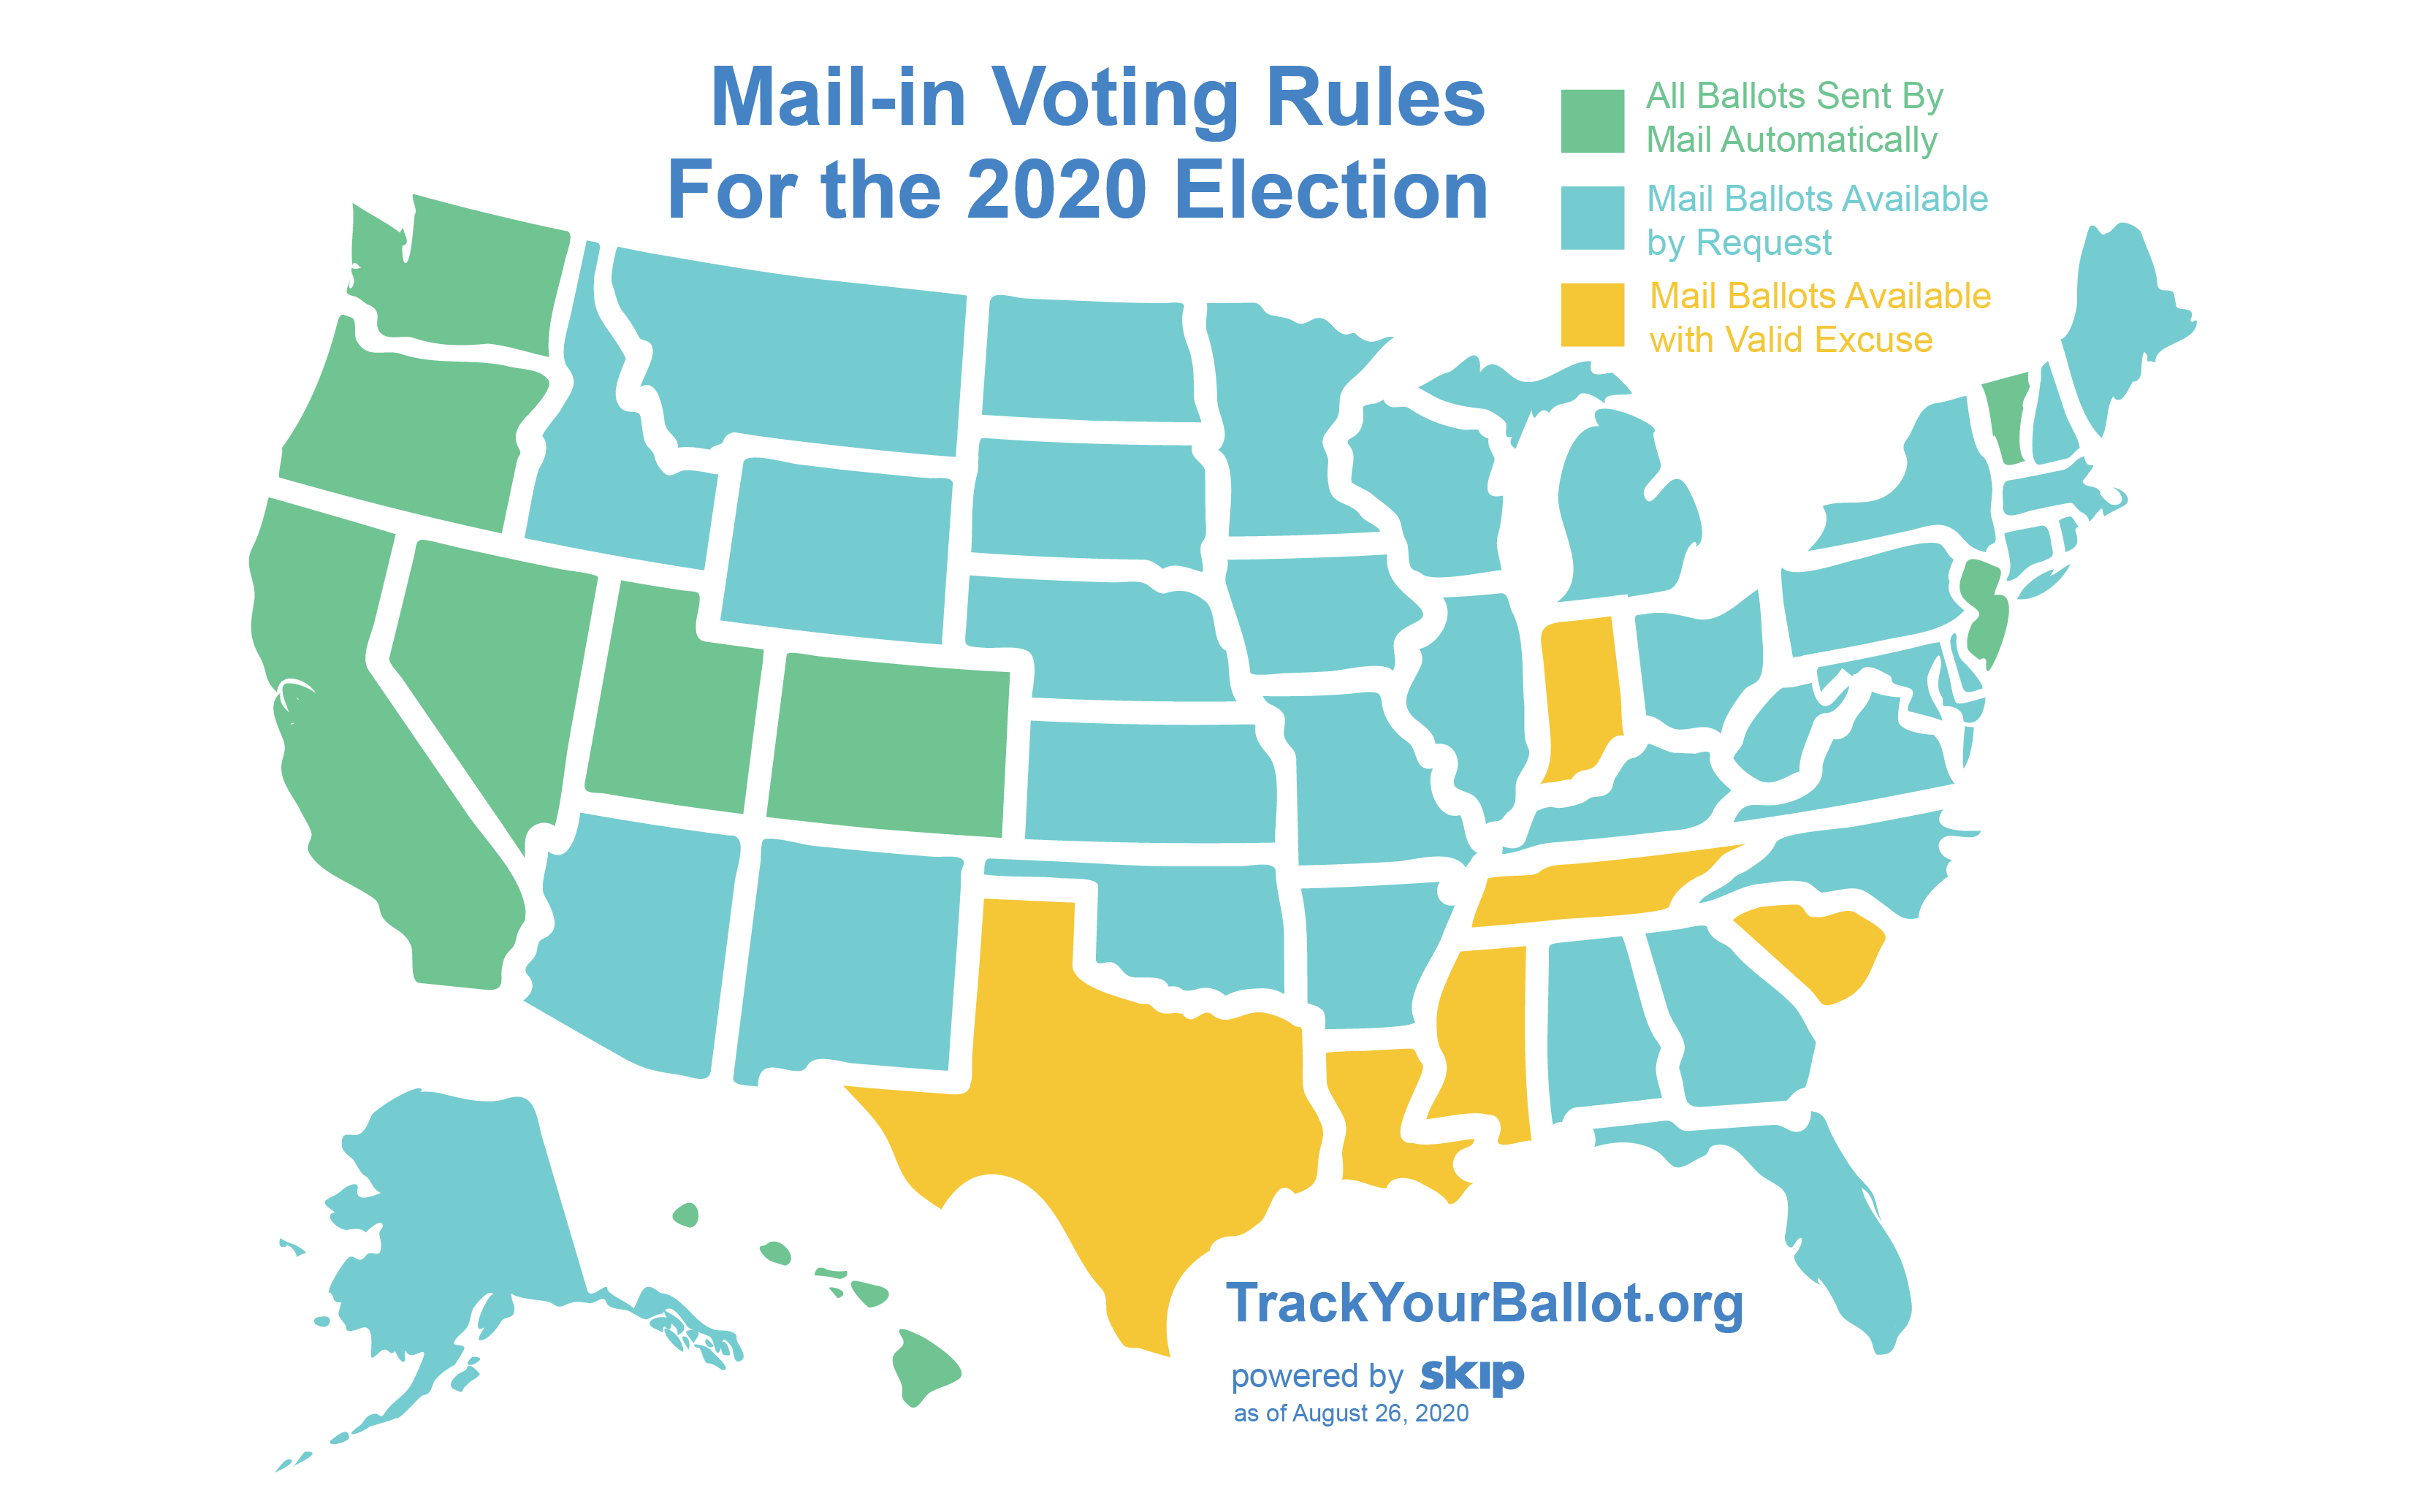 https://ghost.helloskip.com/blog/content/images/2020/08/US-2020-Elections-Mail-in-Voting-Map---as-of-August-2020-01.png